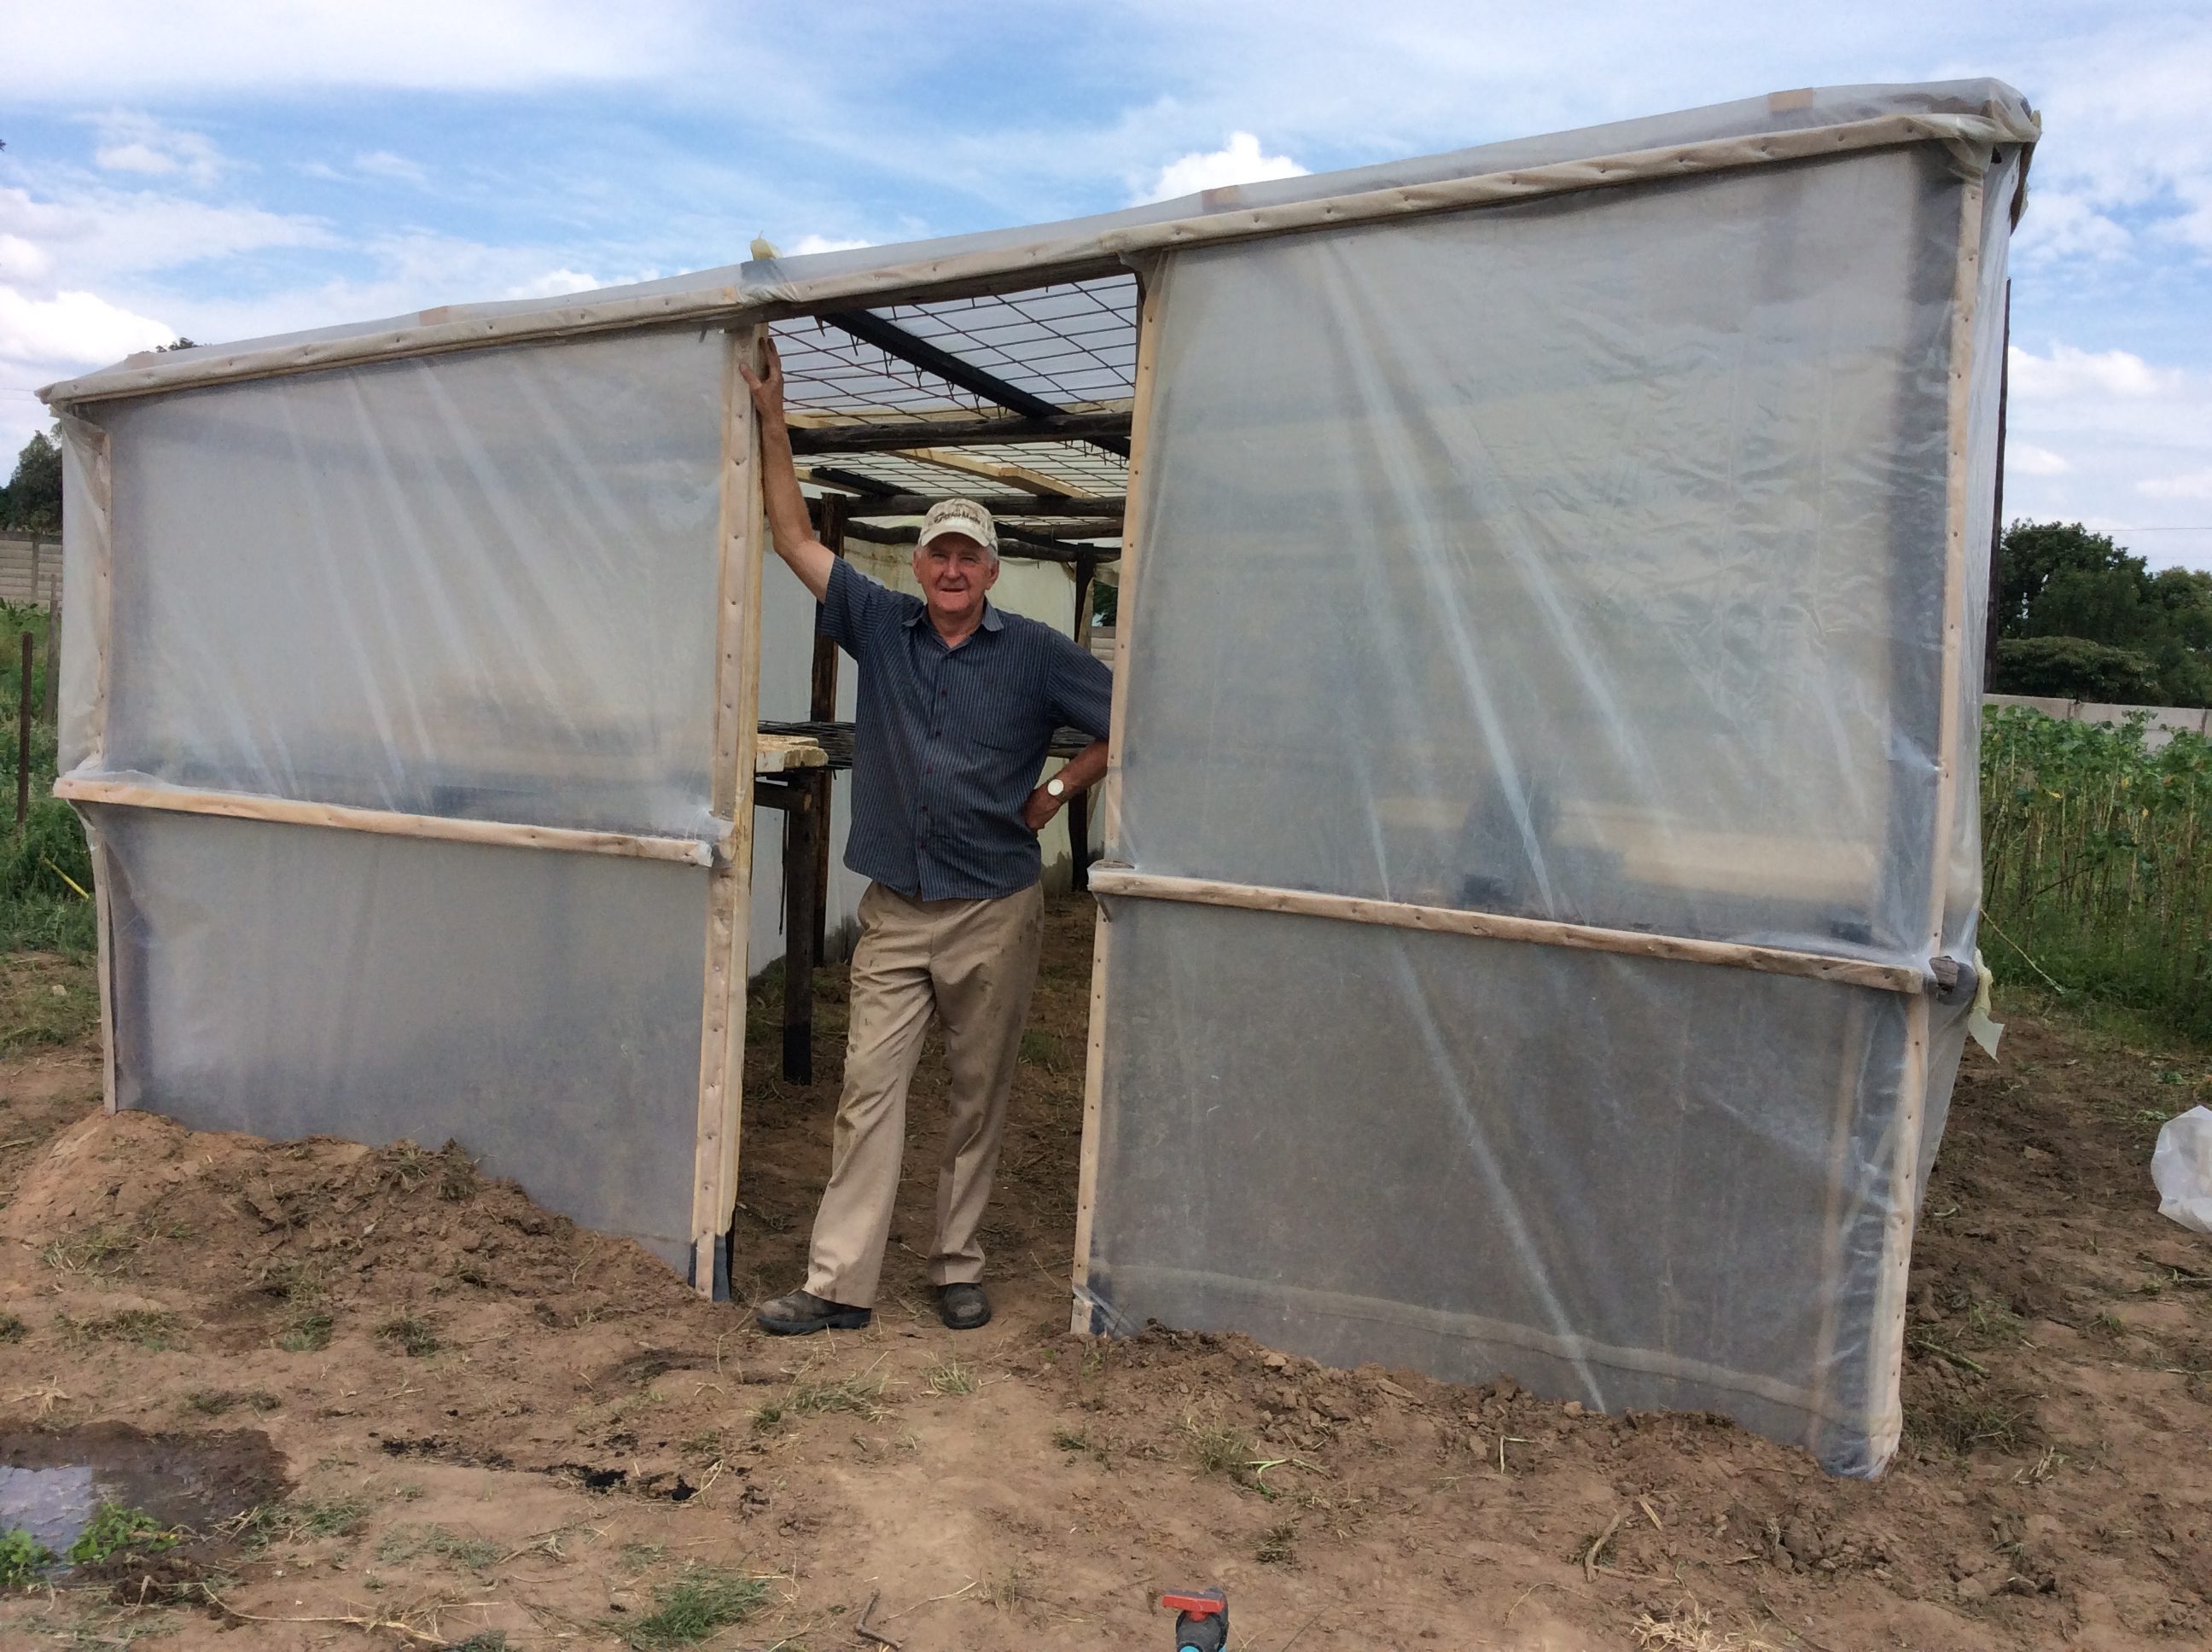 Australian, Mark Edmonds, had a seedling shed built so the home can produce it’s own crop seedlings 